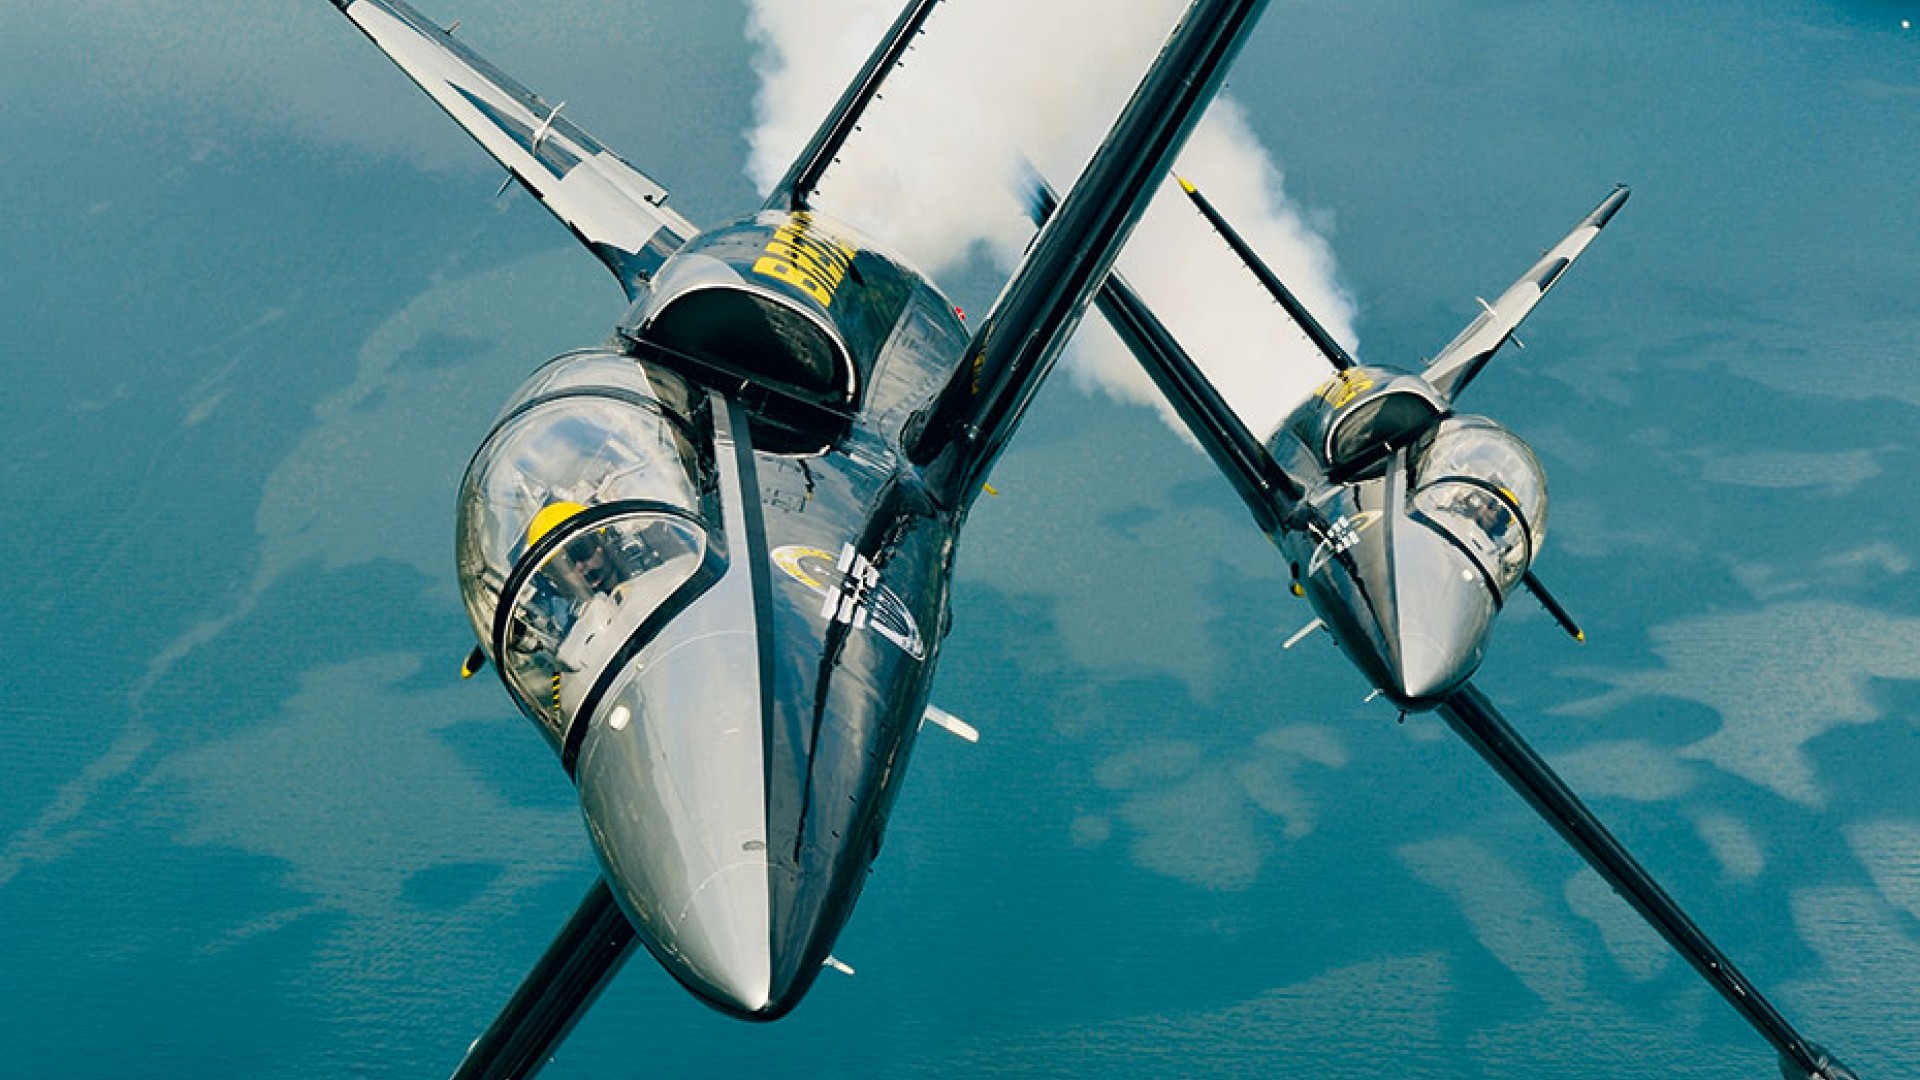 Win a flight with the Breitling Jet Team Competition Square Mile